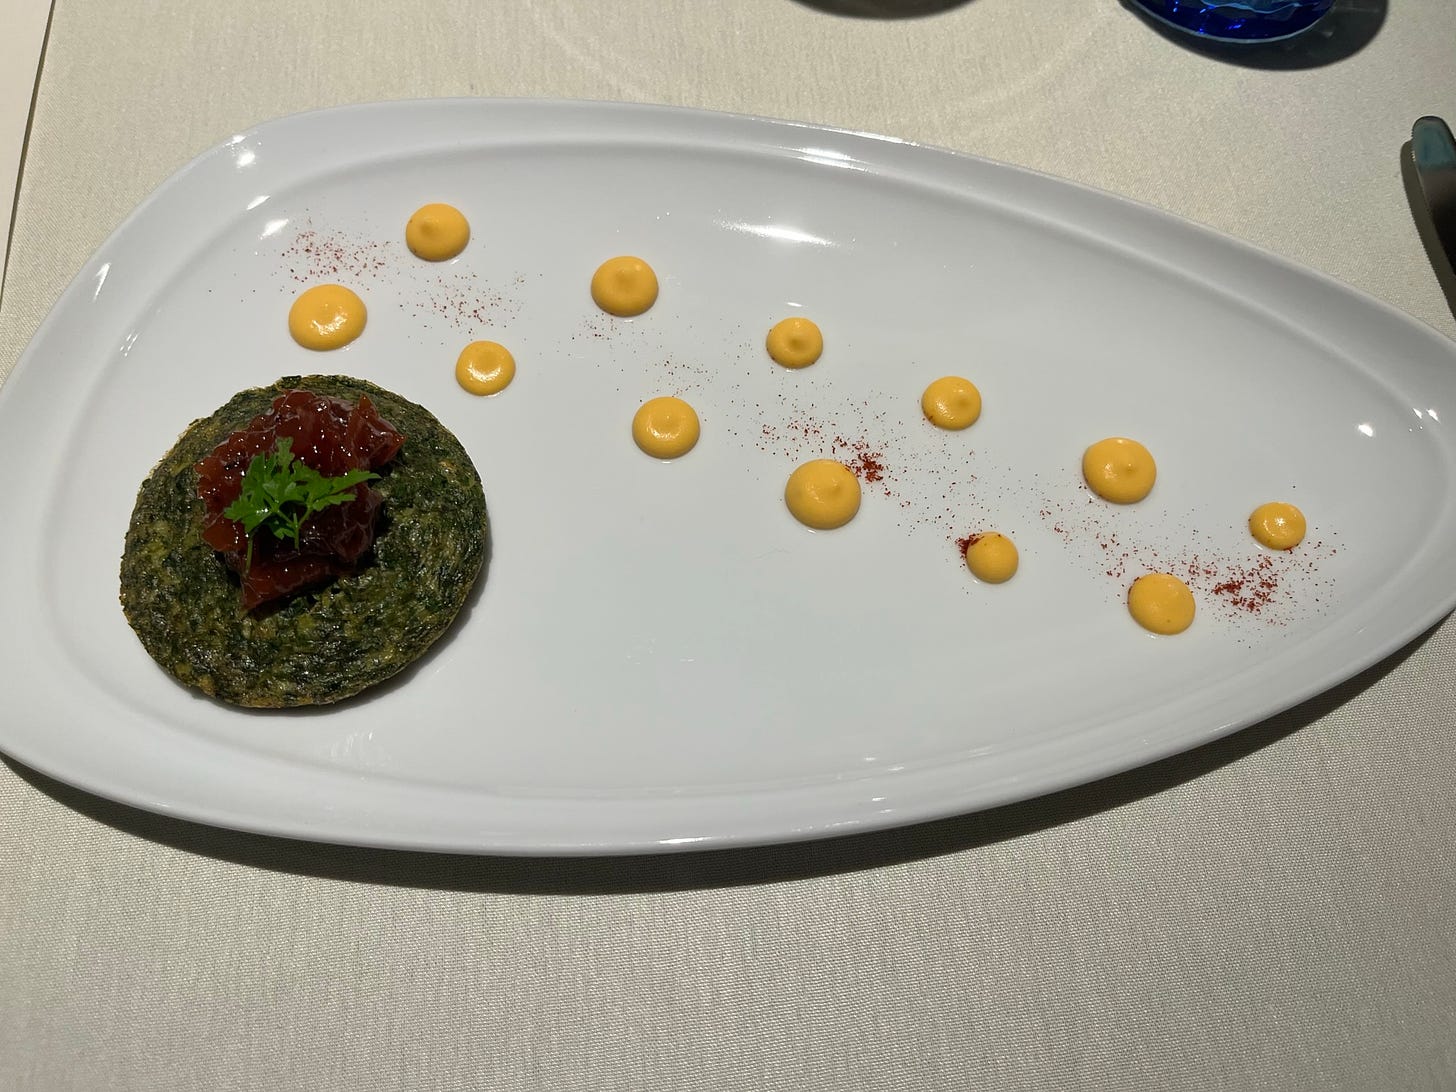 Green herbal omelet with red jam and an herb on top, with dots of yellow sauce on the side